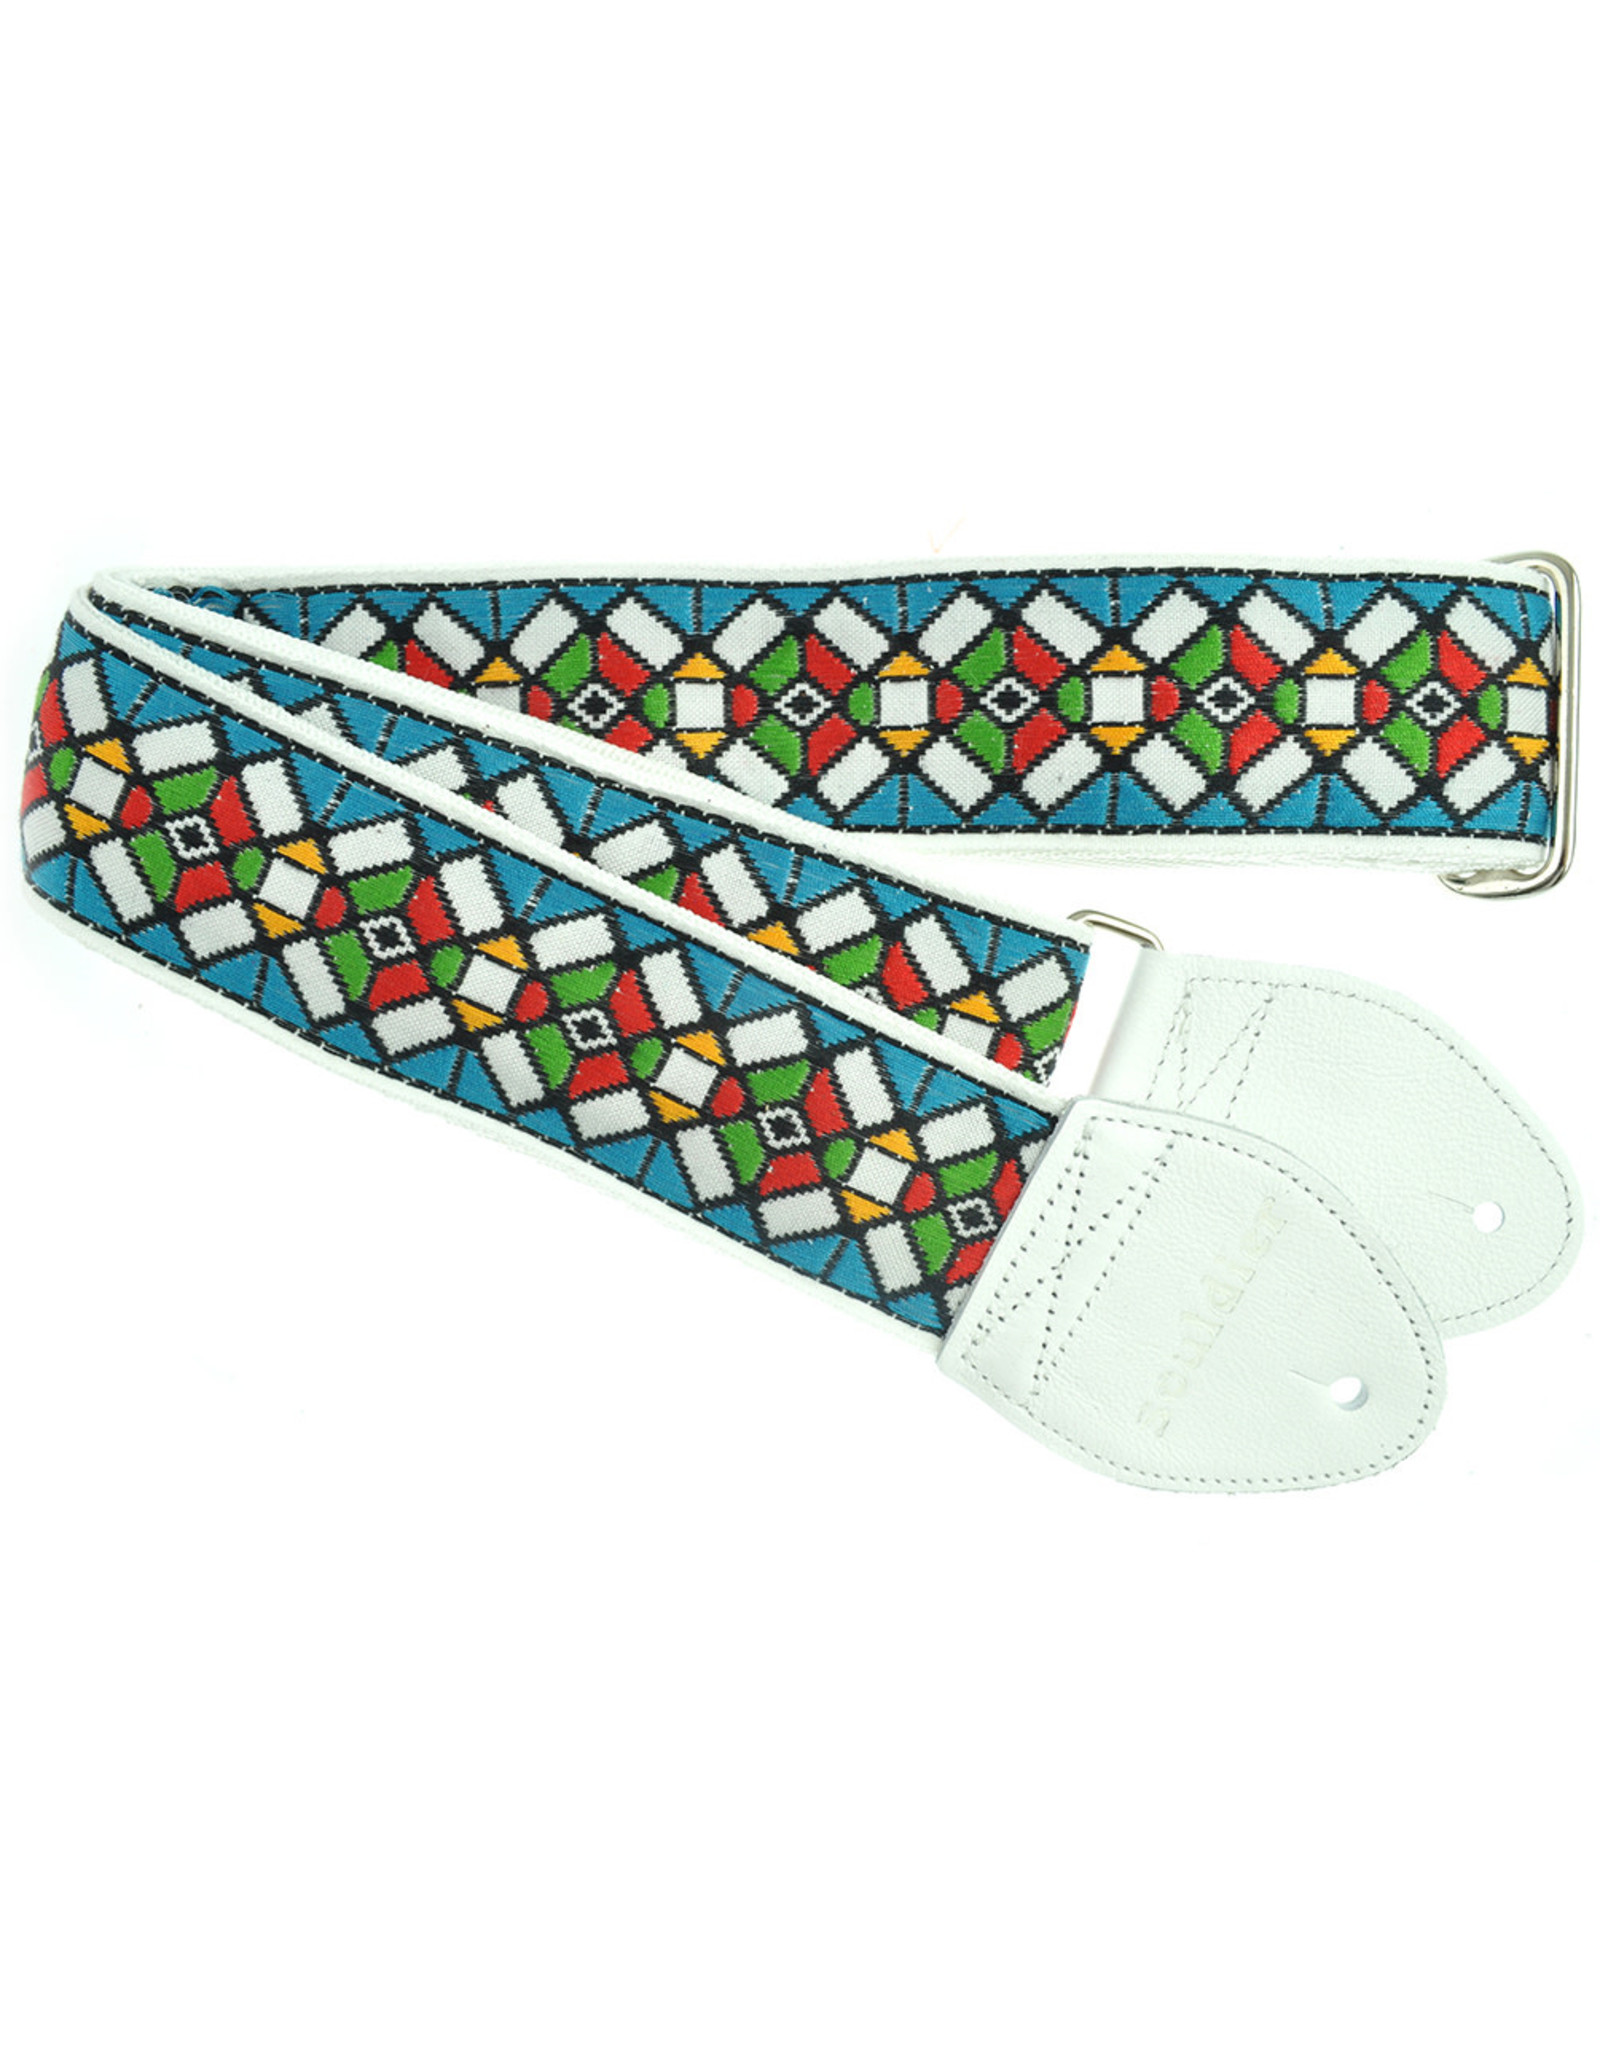 Souldier Souldier Stained Glass - Blue Classic Guitar Strap